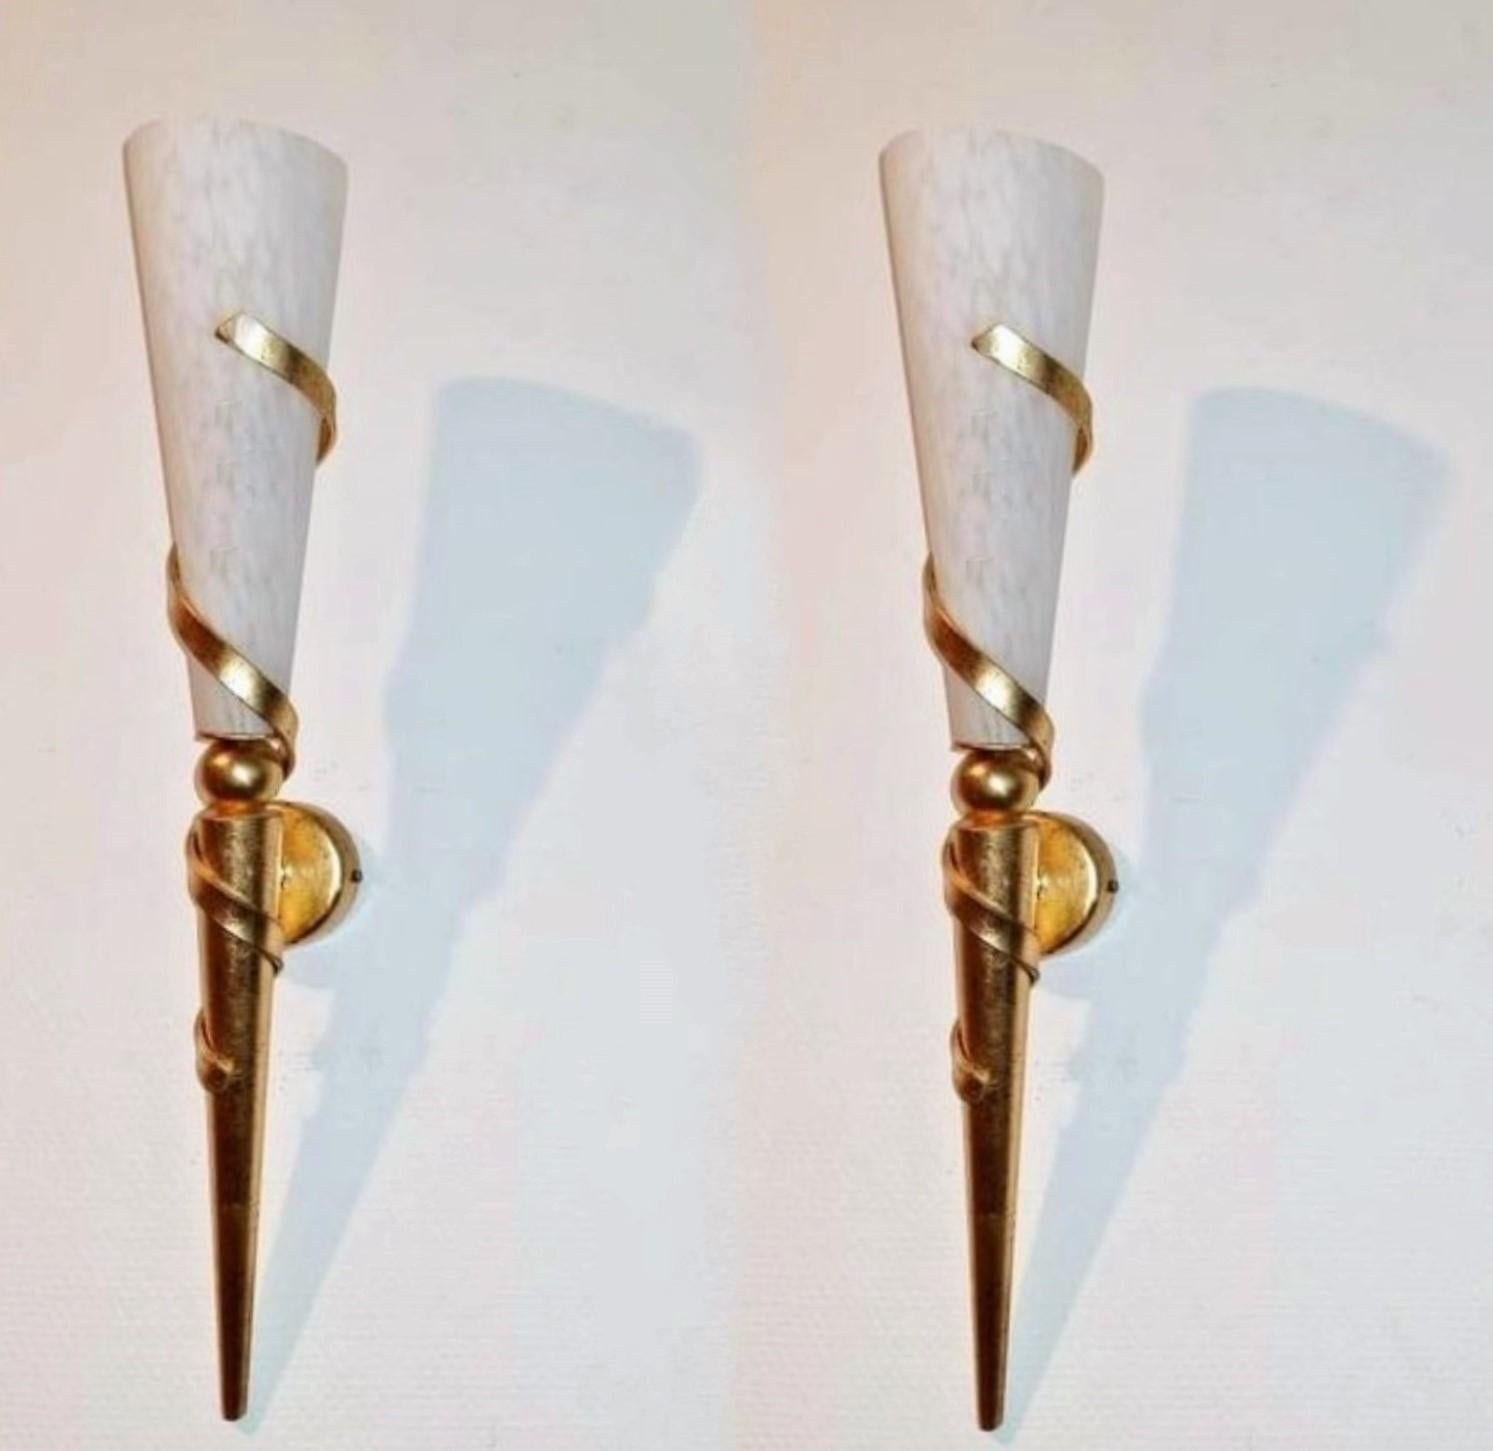 A pair of tall Art Deco torchiere sconces, France 1930s. Very elegant design made of gilded iron parcel metal with conical marbled white glass. The torchieres are 24